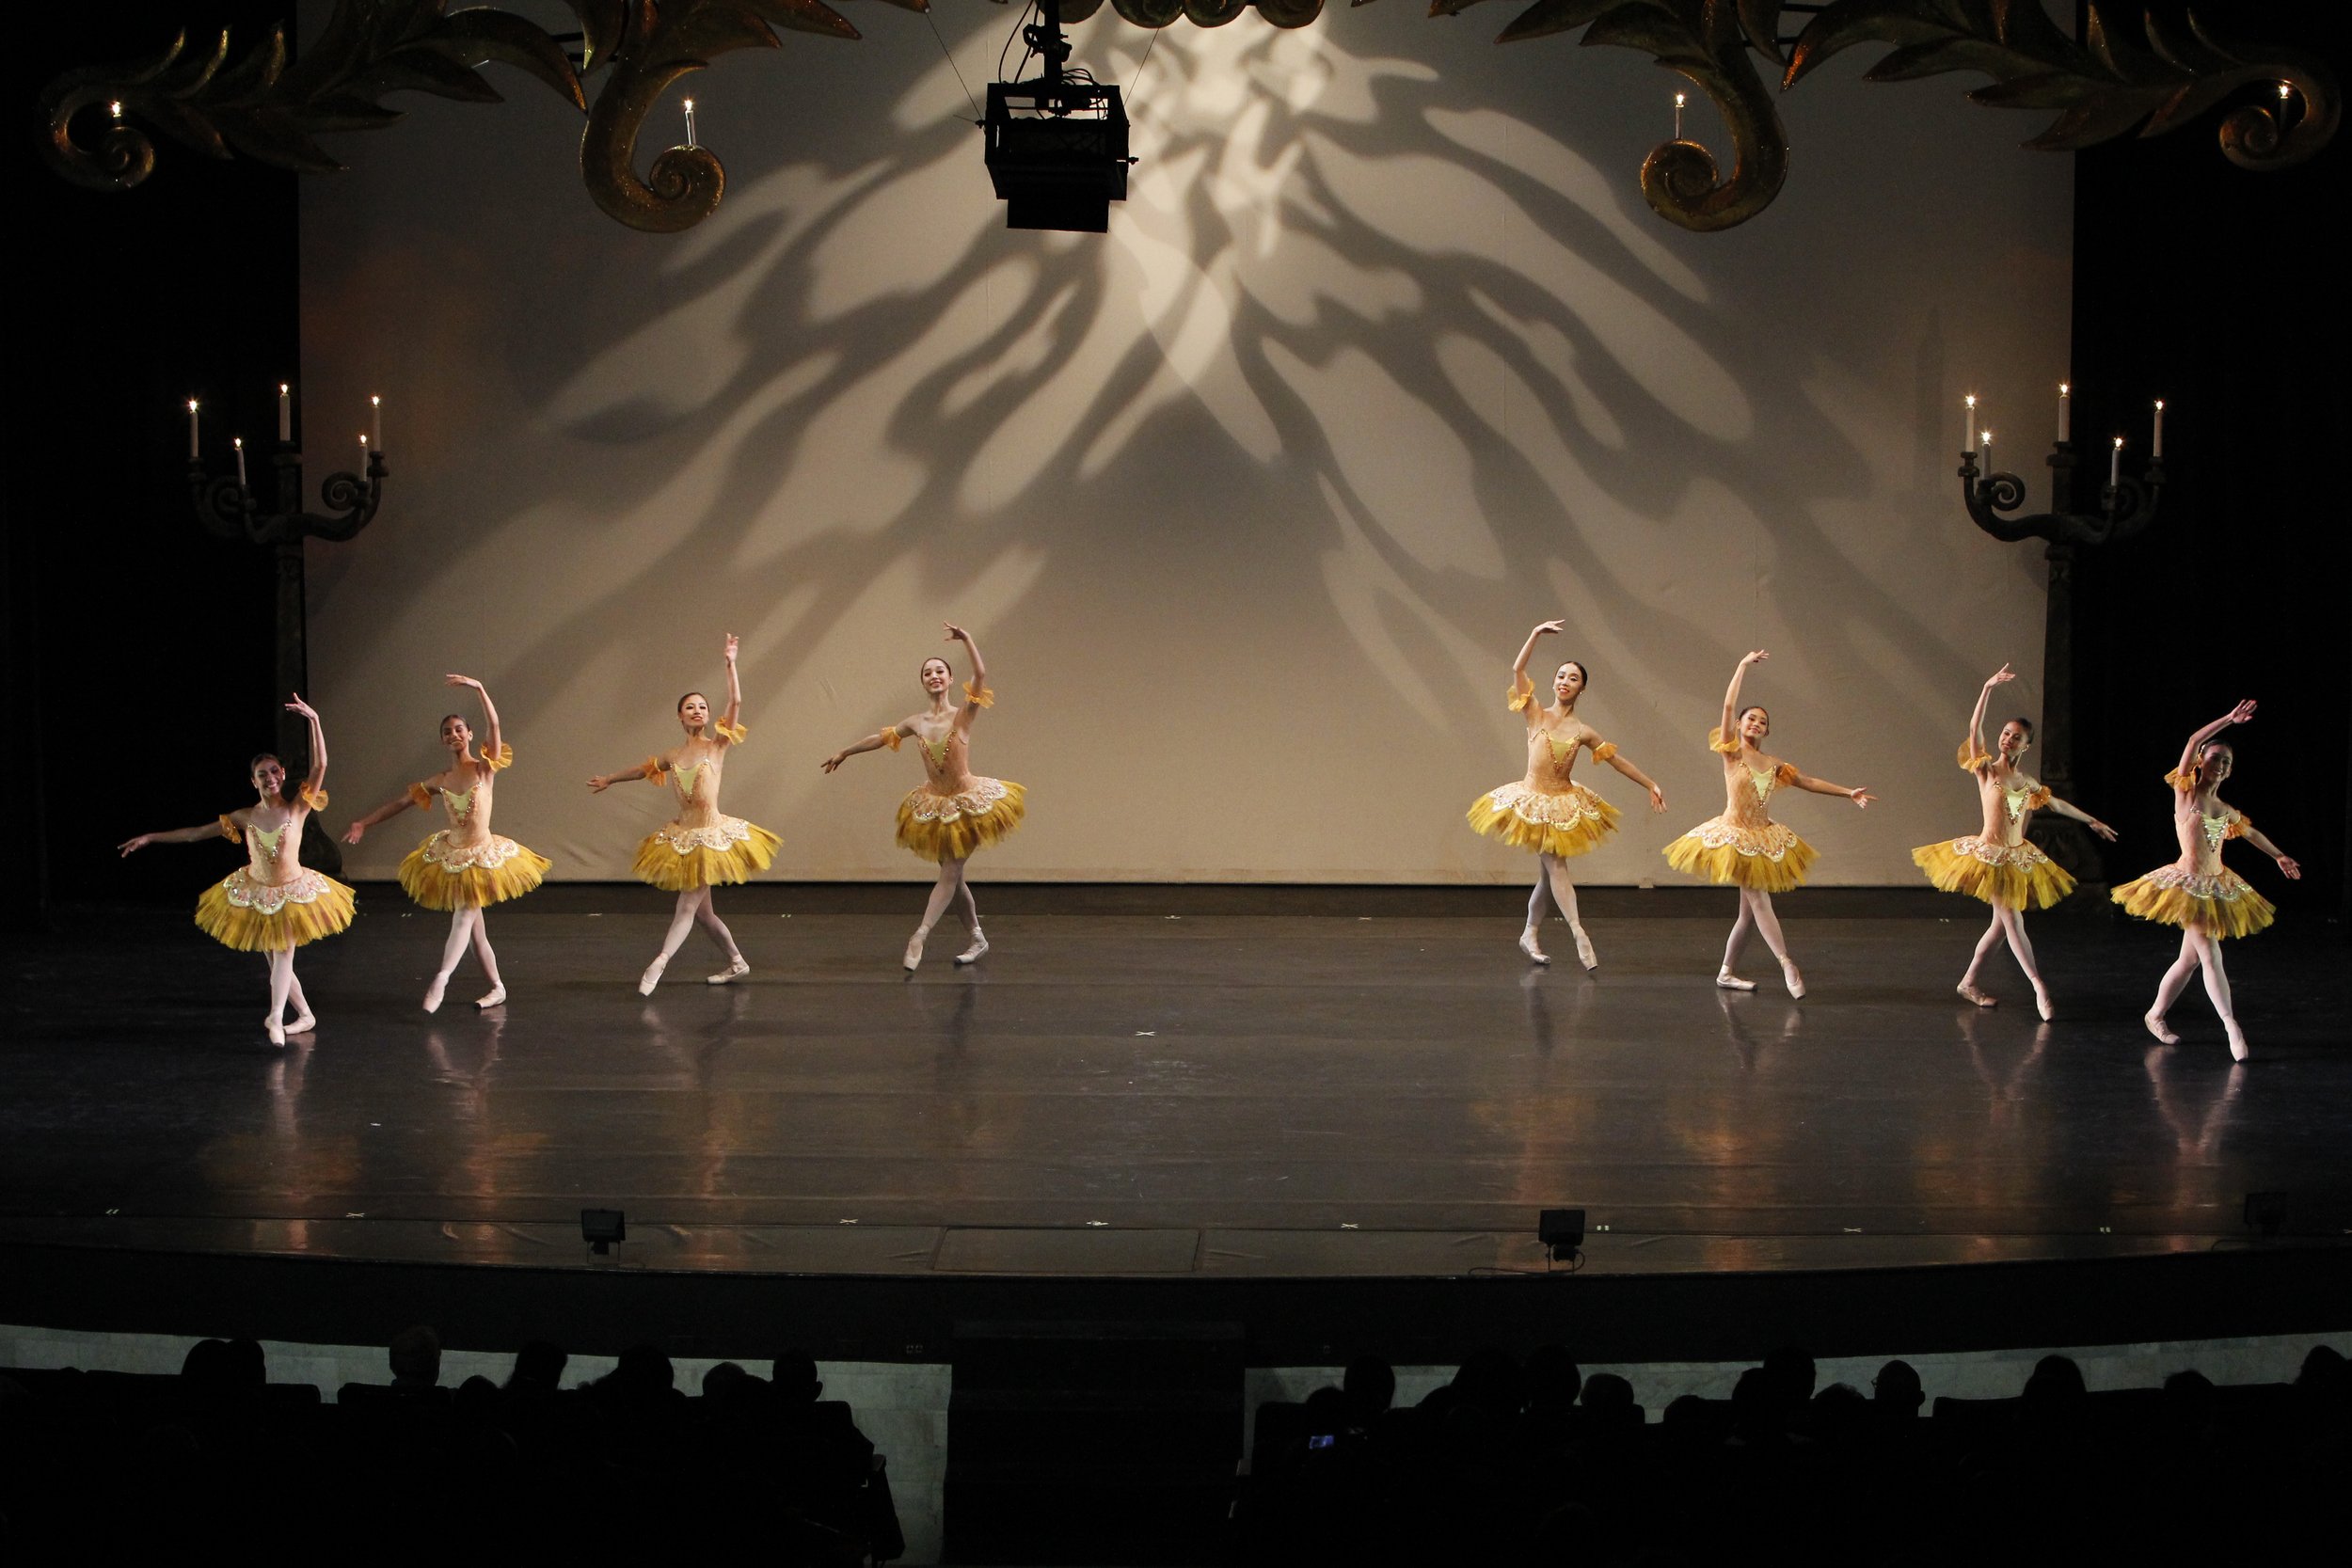    Ballerinas in yellow orange tutus stand out on the darkened stage as they dance a variation from the romantic ballet  Paquita , part of the program in  BM 2.0  (2015). Photo by Kurt Alvarez   